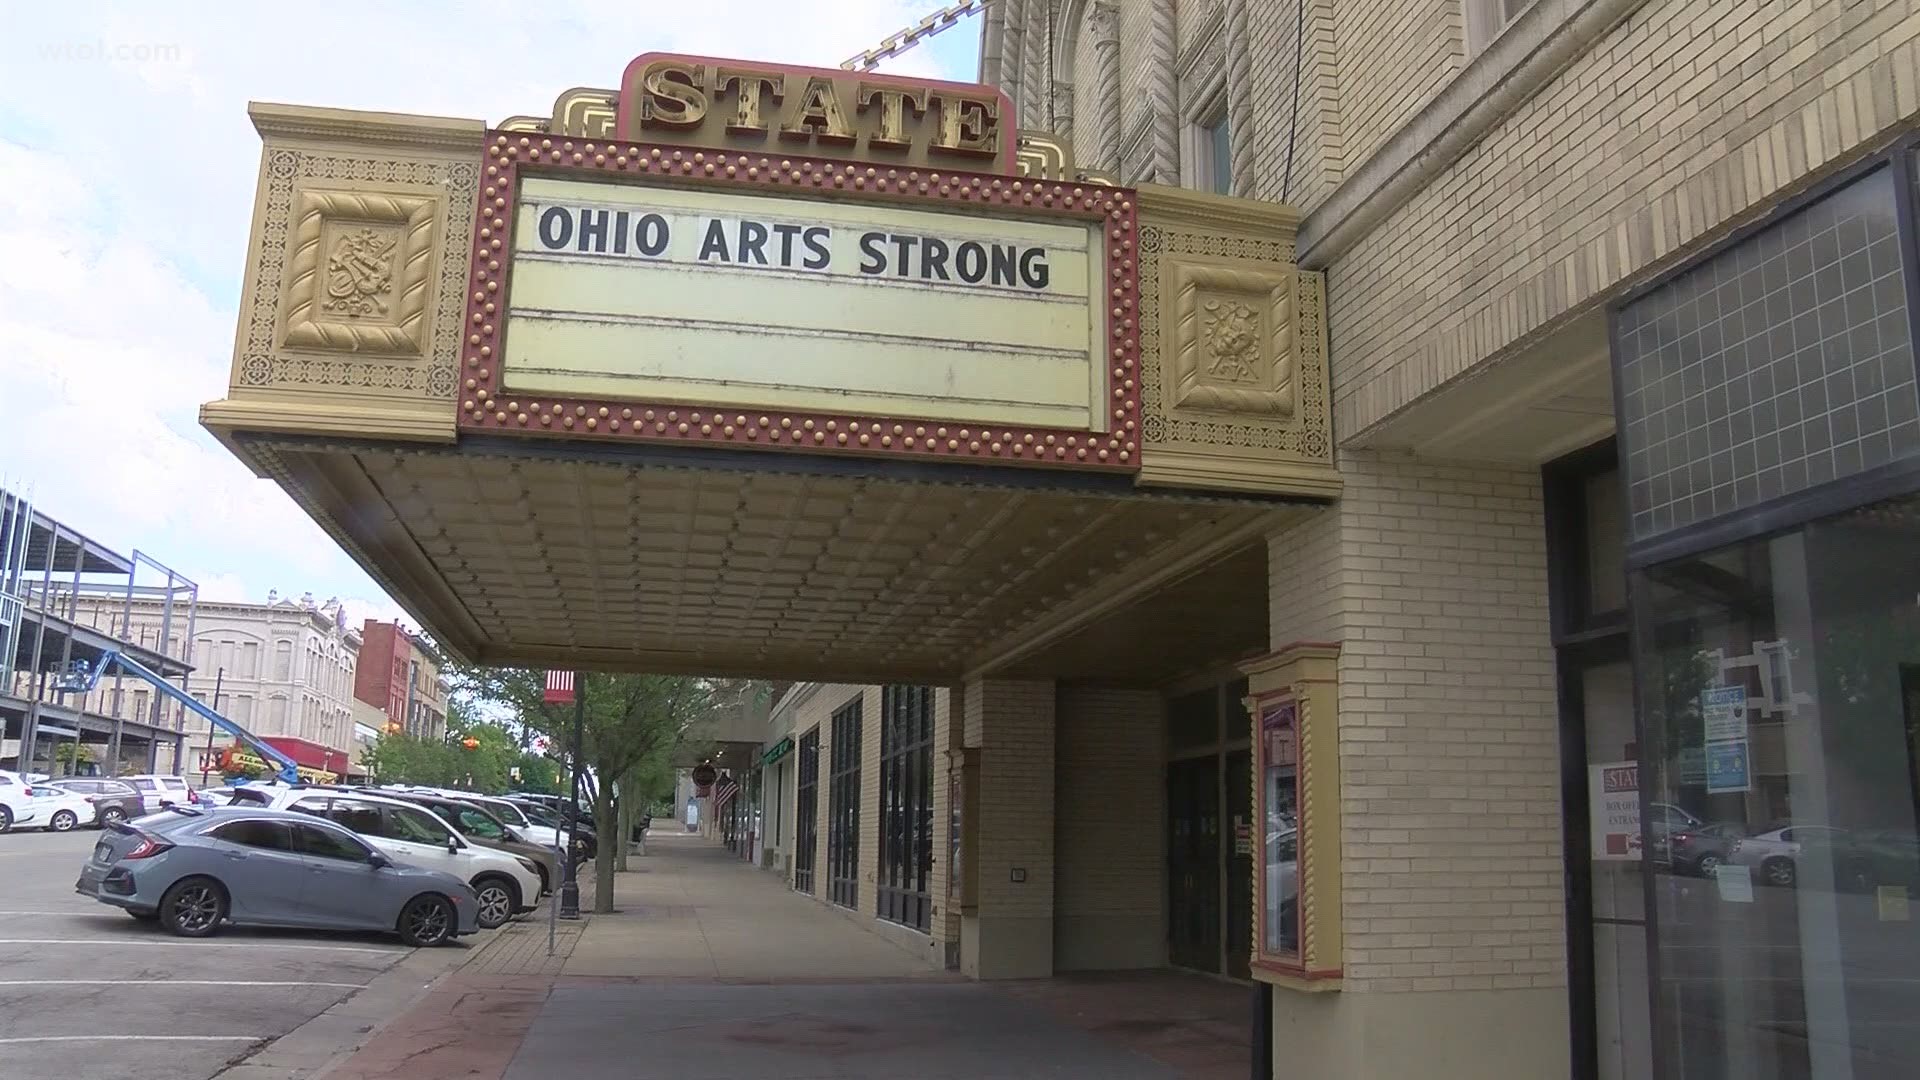 There's still no timetable on reopening, but rebuilding is moving along for the historic Sandusky State Theatre.